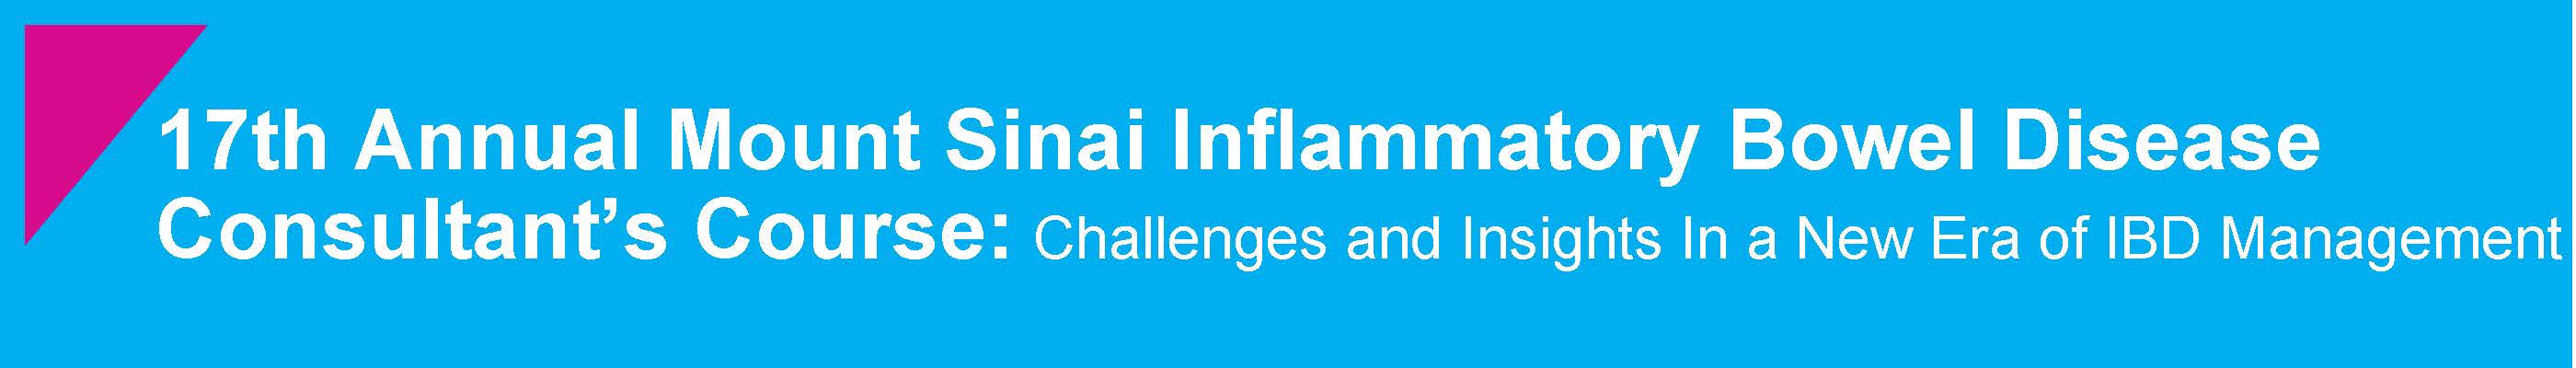 17th Annual Mount Sinai Inflammatory Bowel Disease Consultant's Course: Challenges and Insights in a New Era of IBD Management Banner